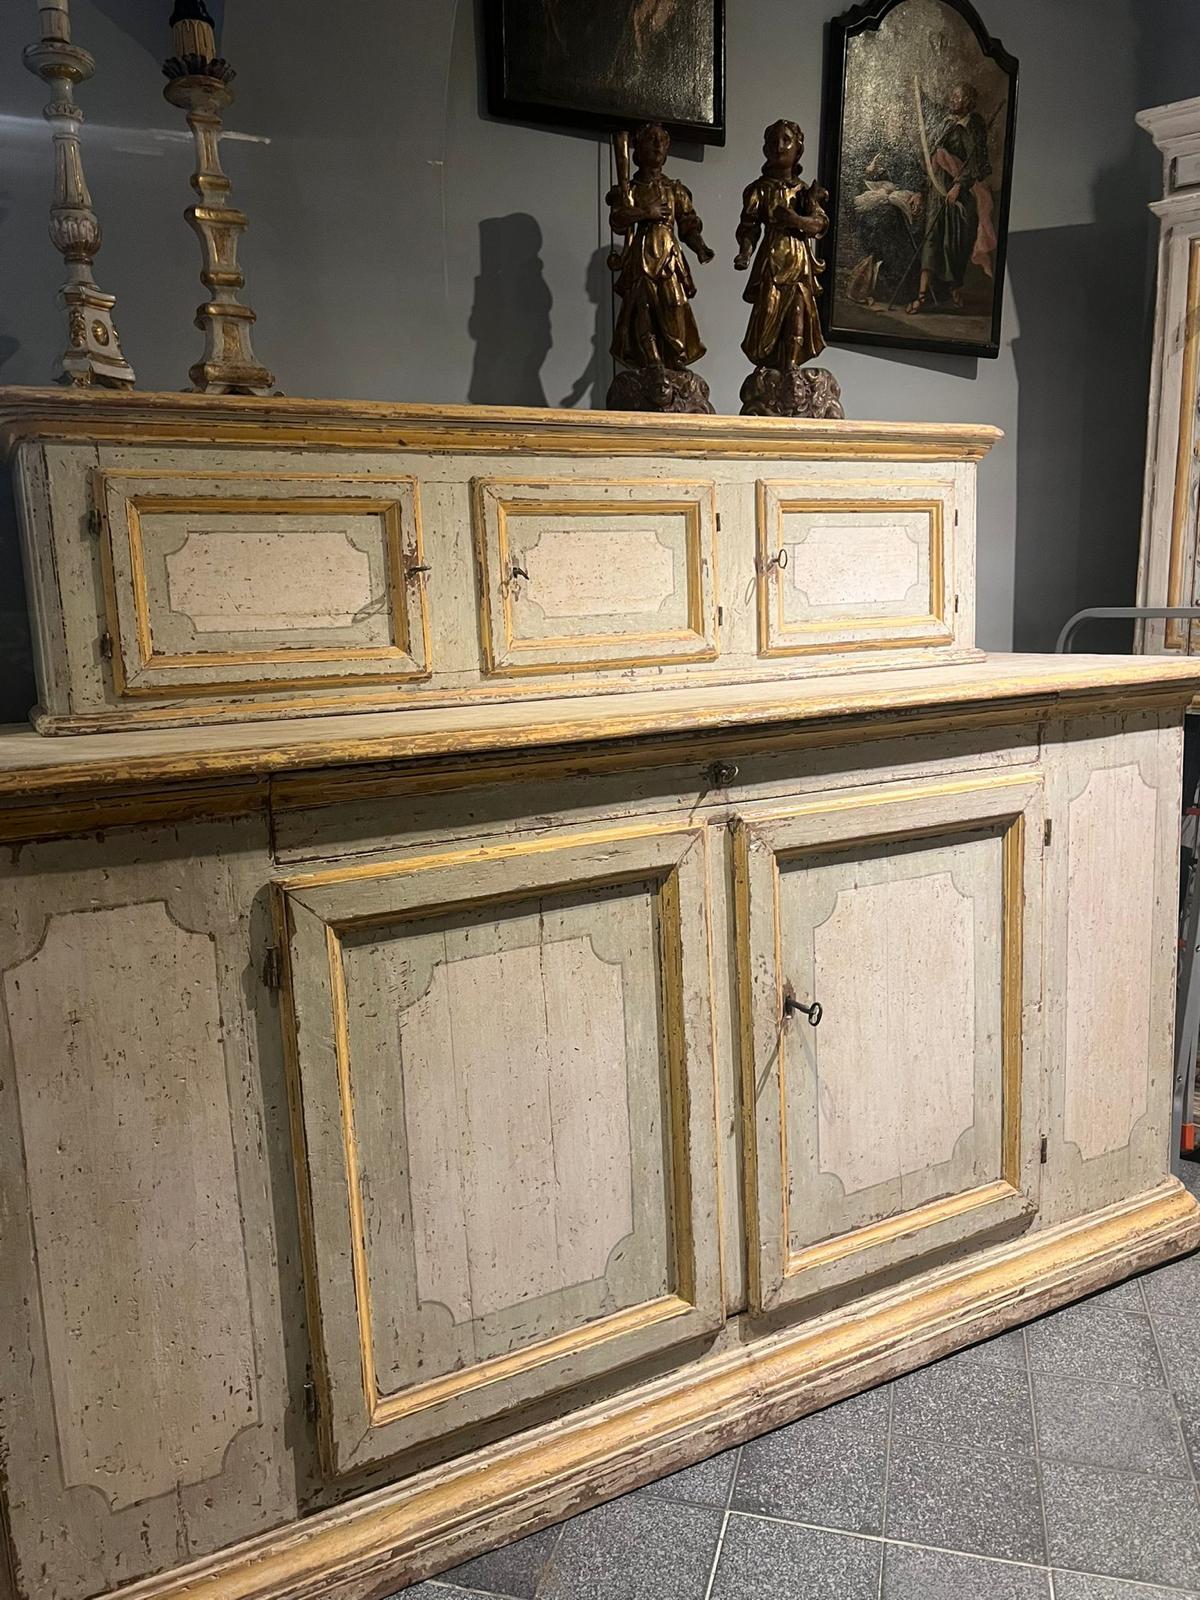 Beautiful sacristy furniture in painted poplar wood. This piece of furniture features an original lacquer. Particularity in the sides where there are doors and the sliding tray used as a shelf in the central body, Tuscany, early 18th